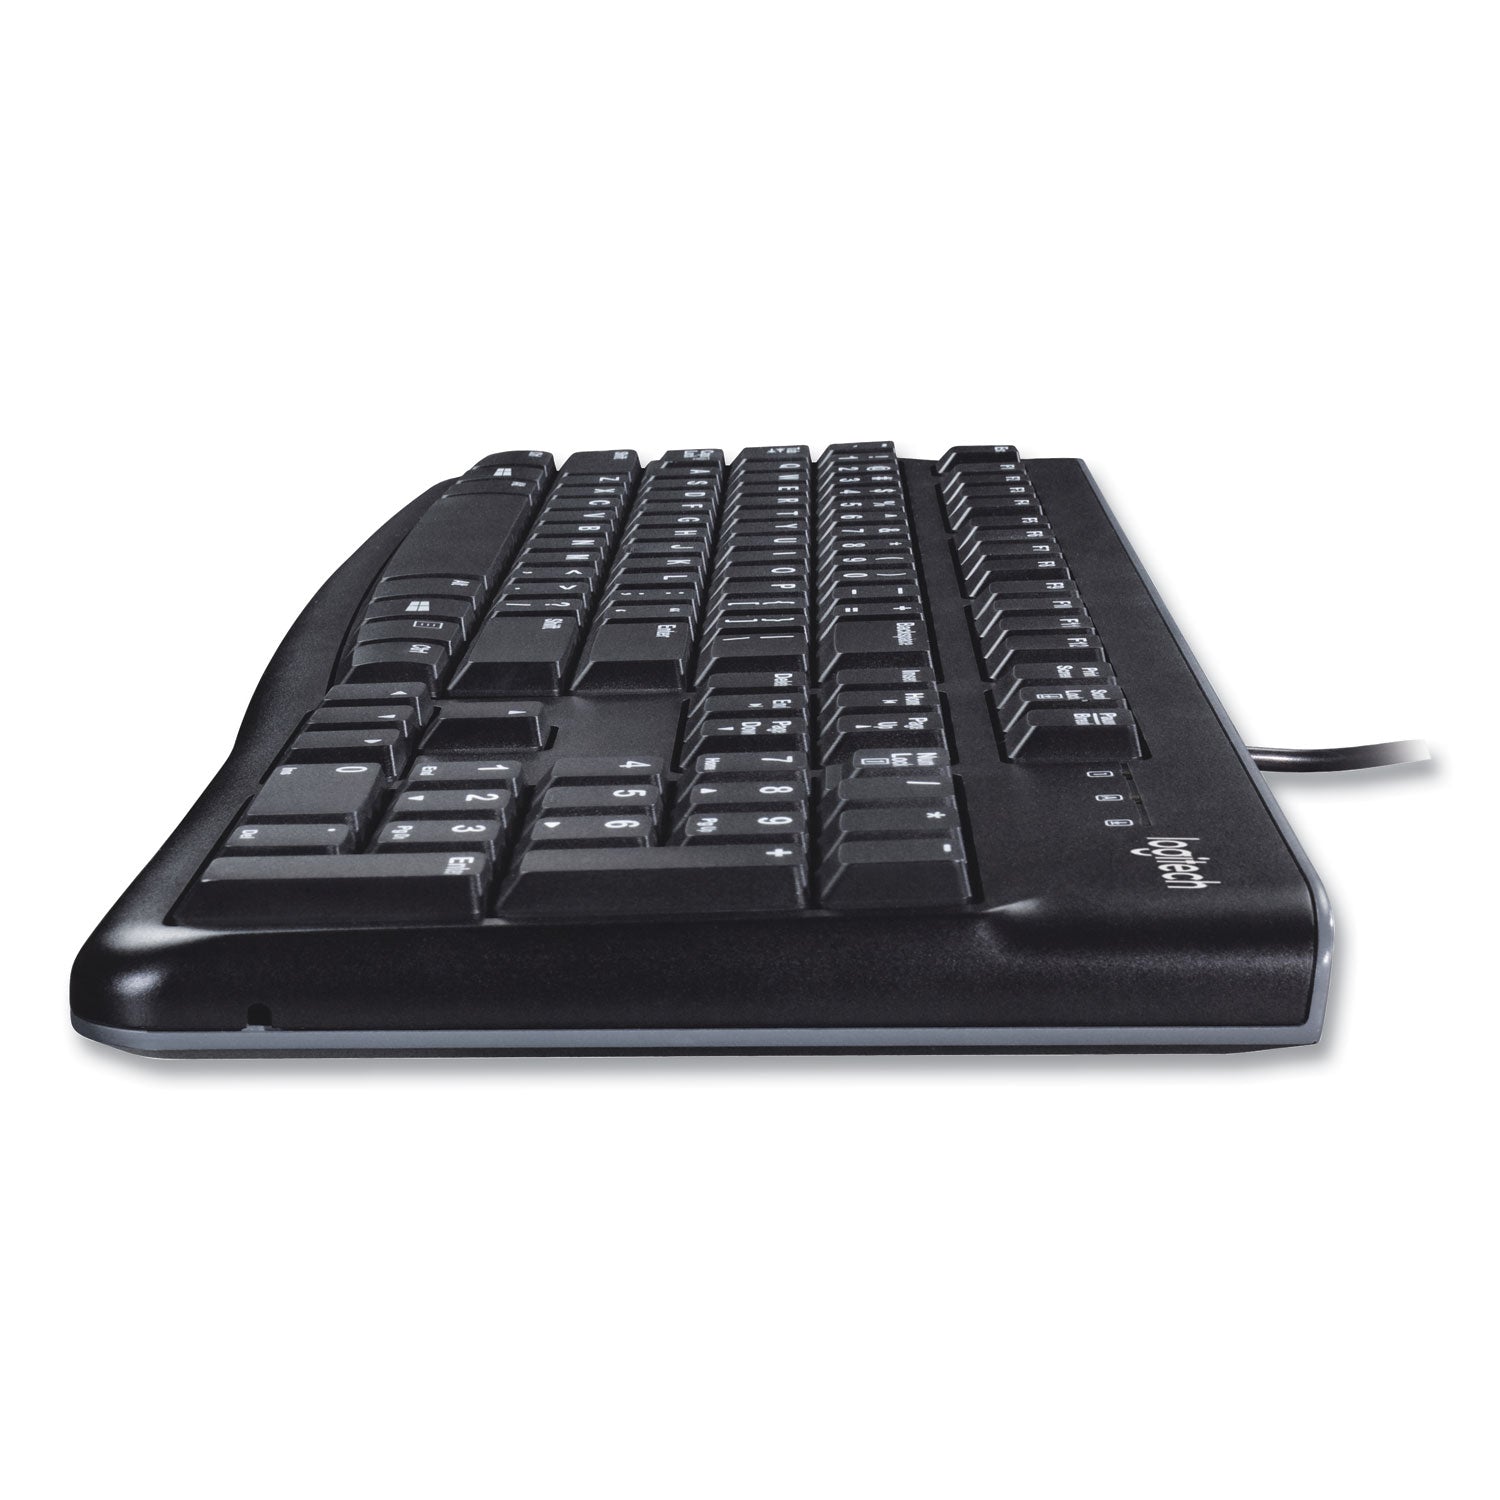 MK120 Wired Keyboard + Mouse Combo, USB 2.0, Black - 